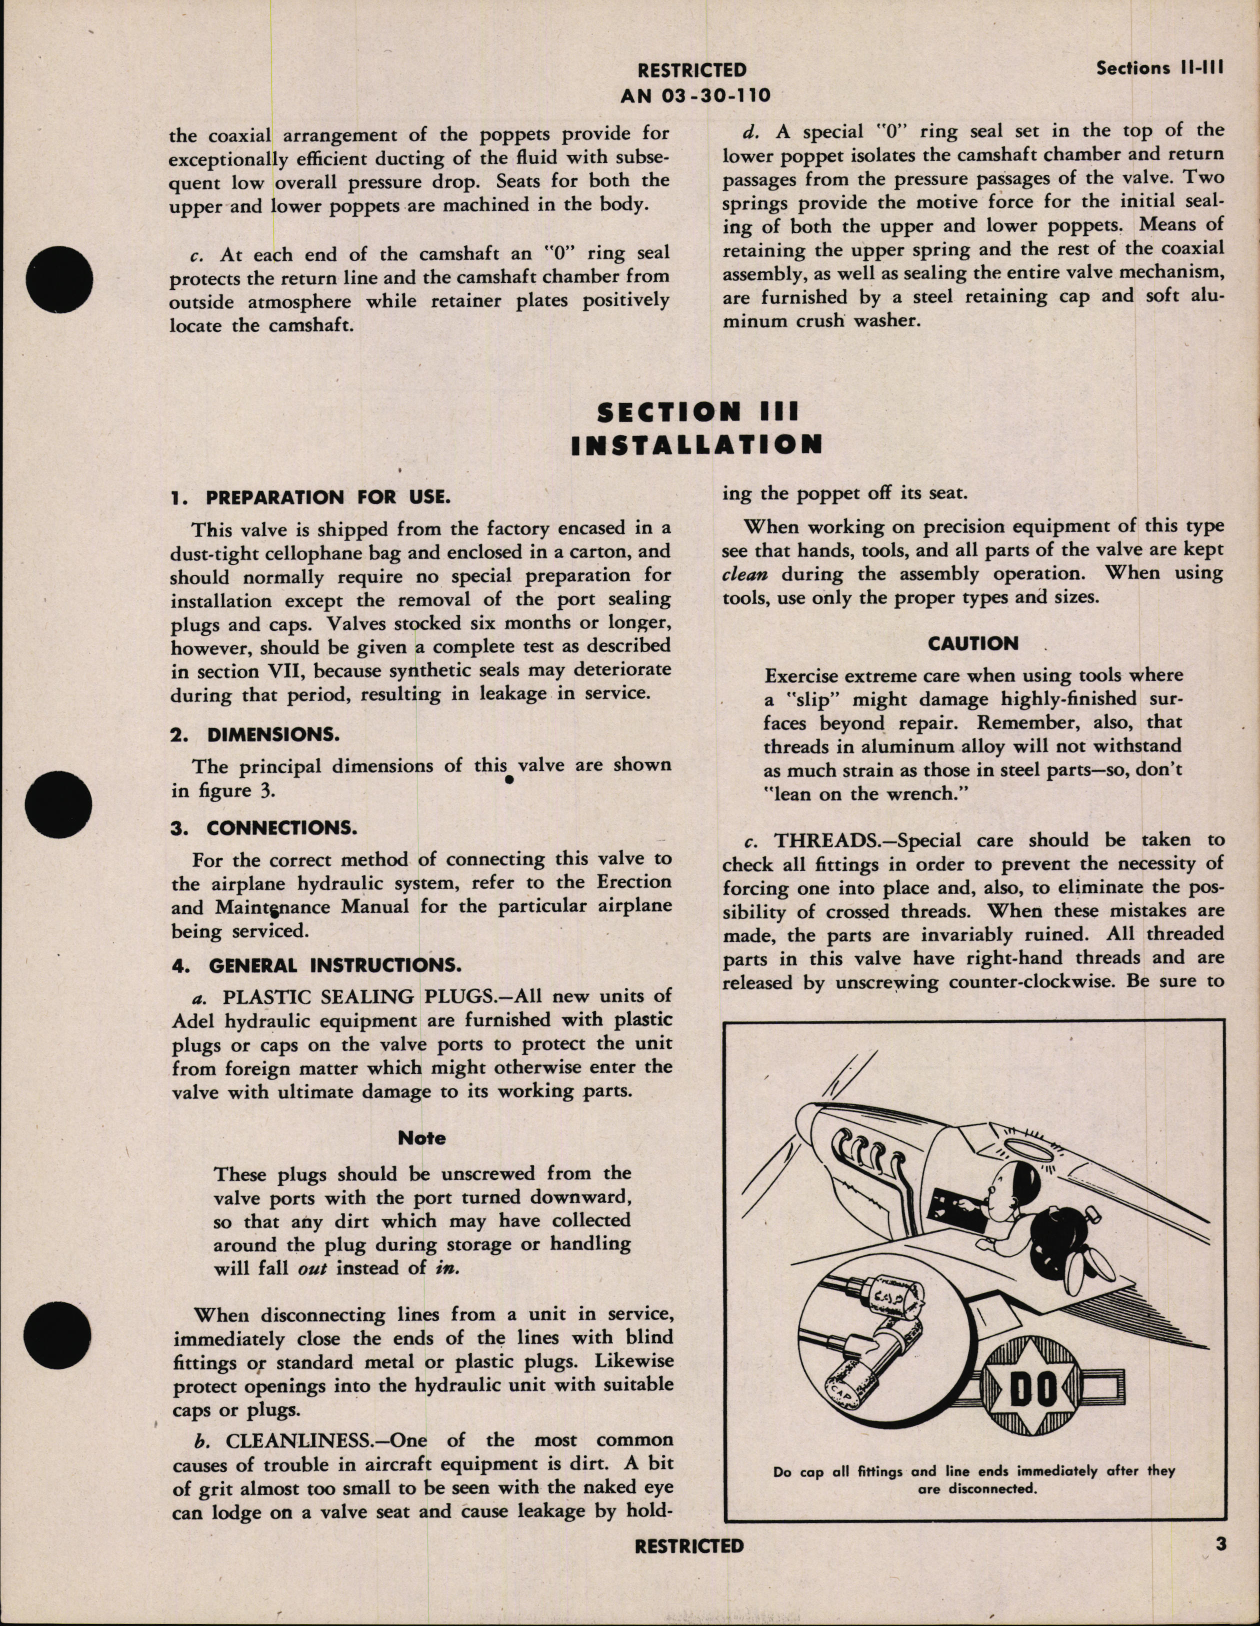 Sample page 7 from AirCorps Library document: Handbook of Instructions with Parts Catalog for Dural Seat Single Hydraulic Selector Valves